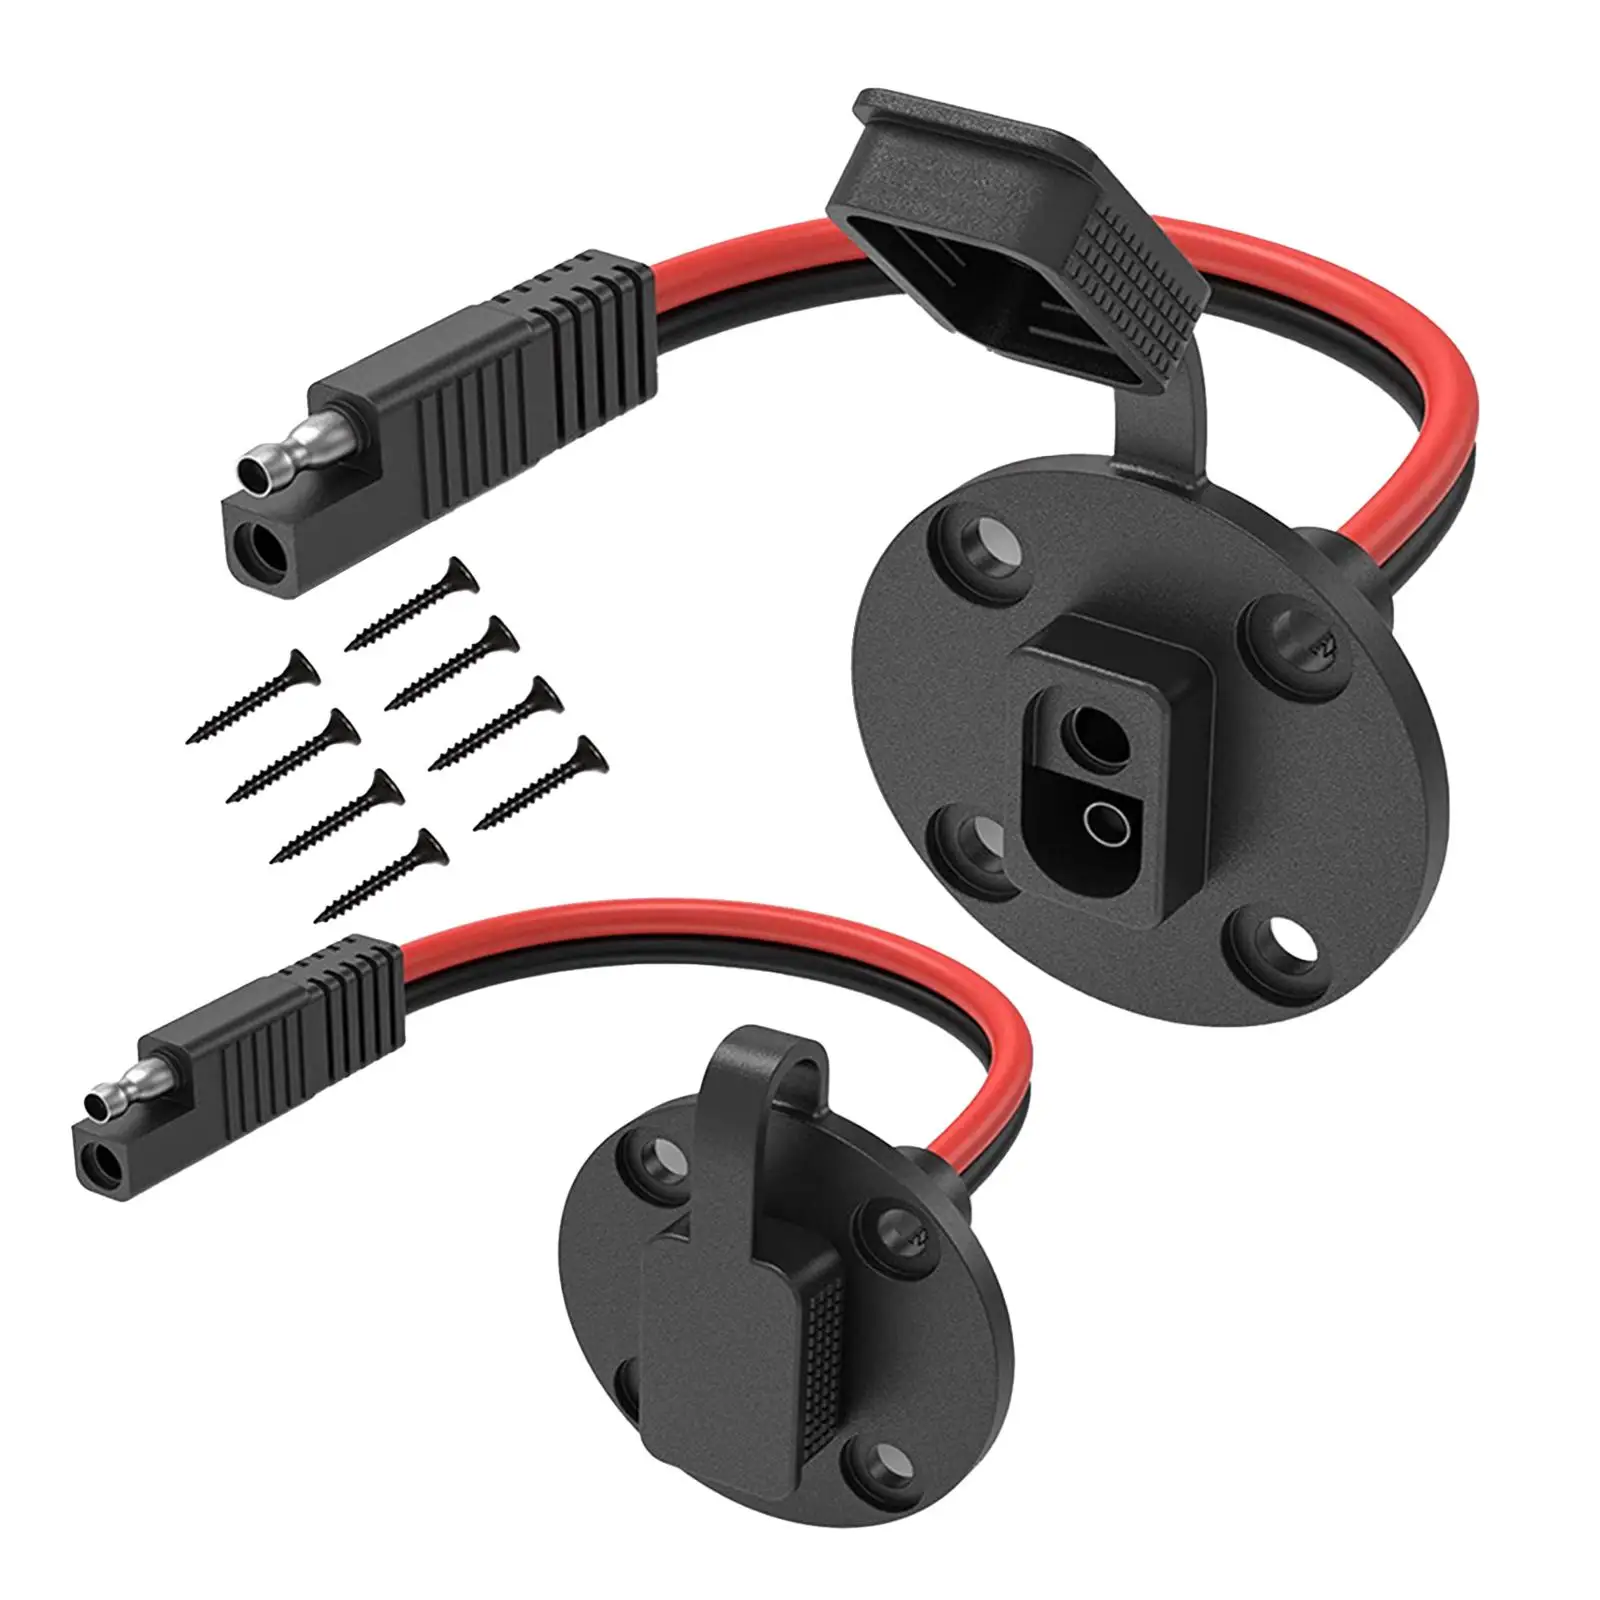 2x SAE Socket 2 Holes Harness Waterproof Cap 12AWG RV Sidewall Port Cars Accessory Tractor SAE Battery Connector Battery Cables